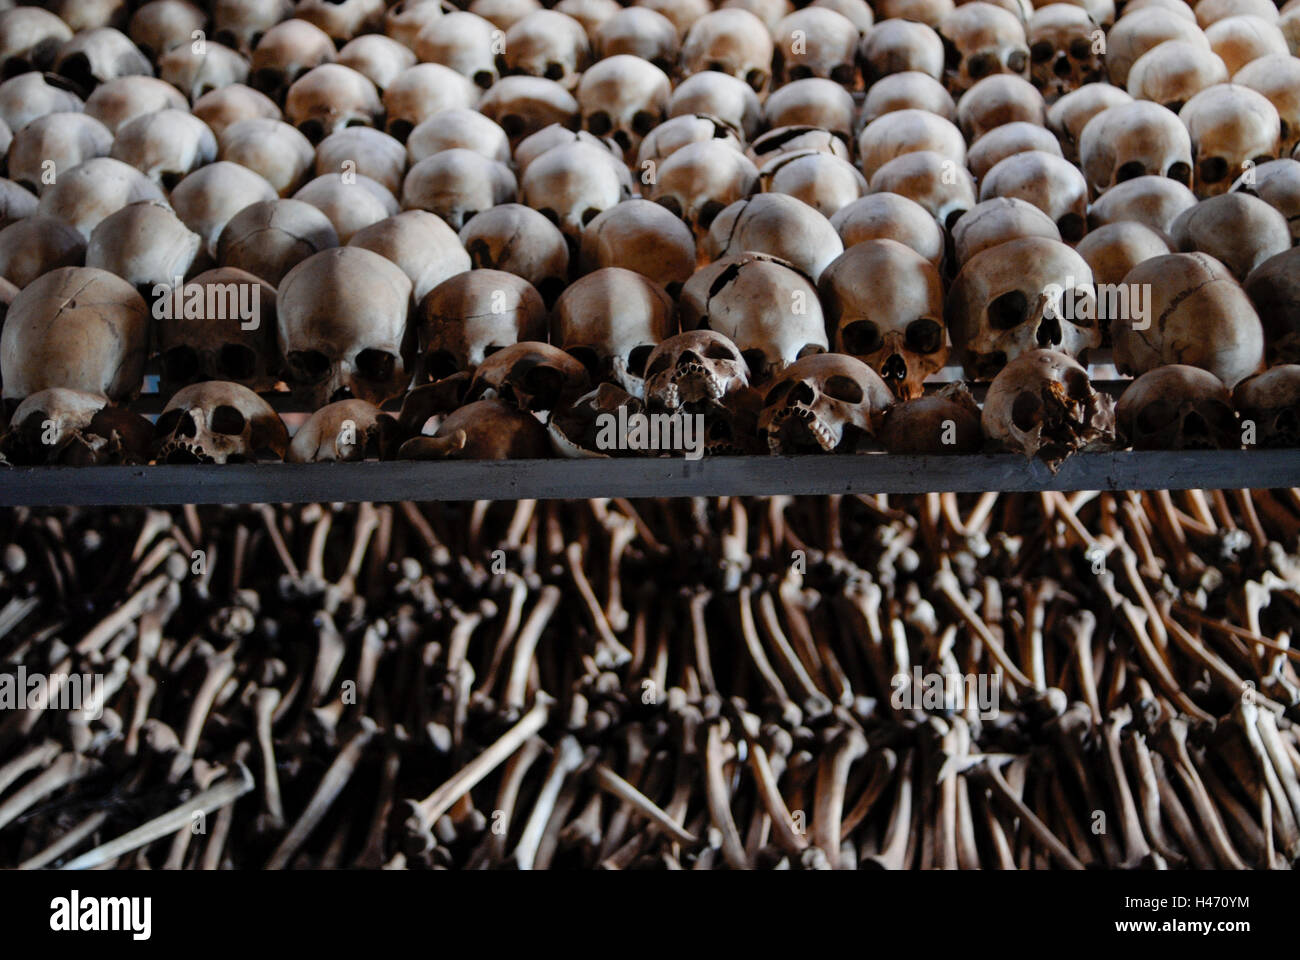 RWANDA Genocide memorial Ntarama , during the genocide in April 1994 about 5000 Tutsi people were killed by Hutu murder in this church, skulls and bones of murdered people in mass grave Stock Photo